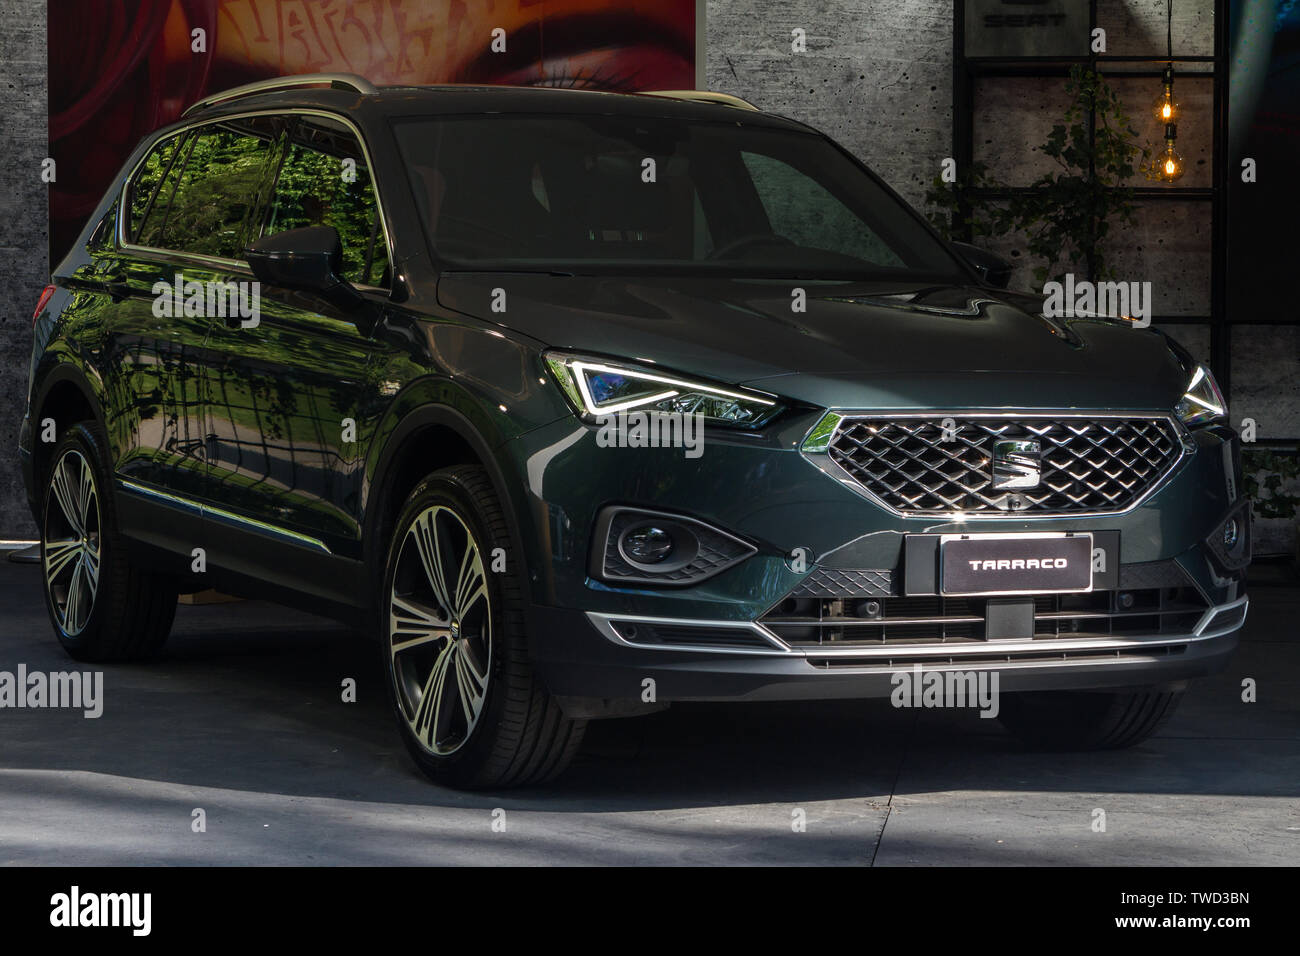 A SEAT Tarraco. 2019 edition of Parco Valentino car show hosts cars by many brands and car designers in Valentino Park in Torino, Italy. Stock Photo